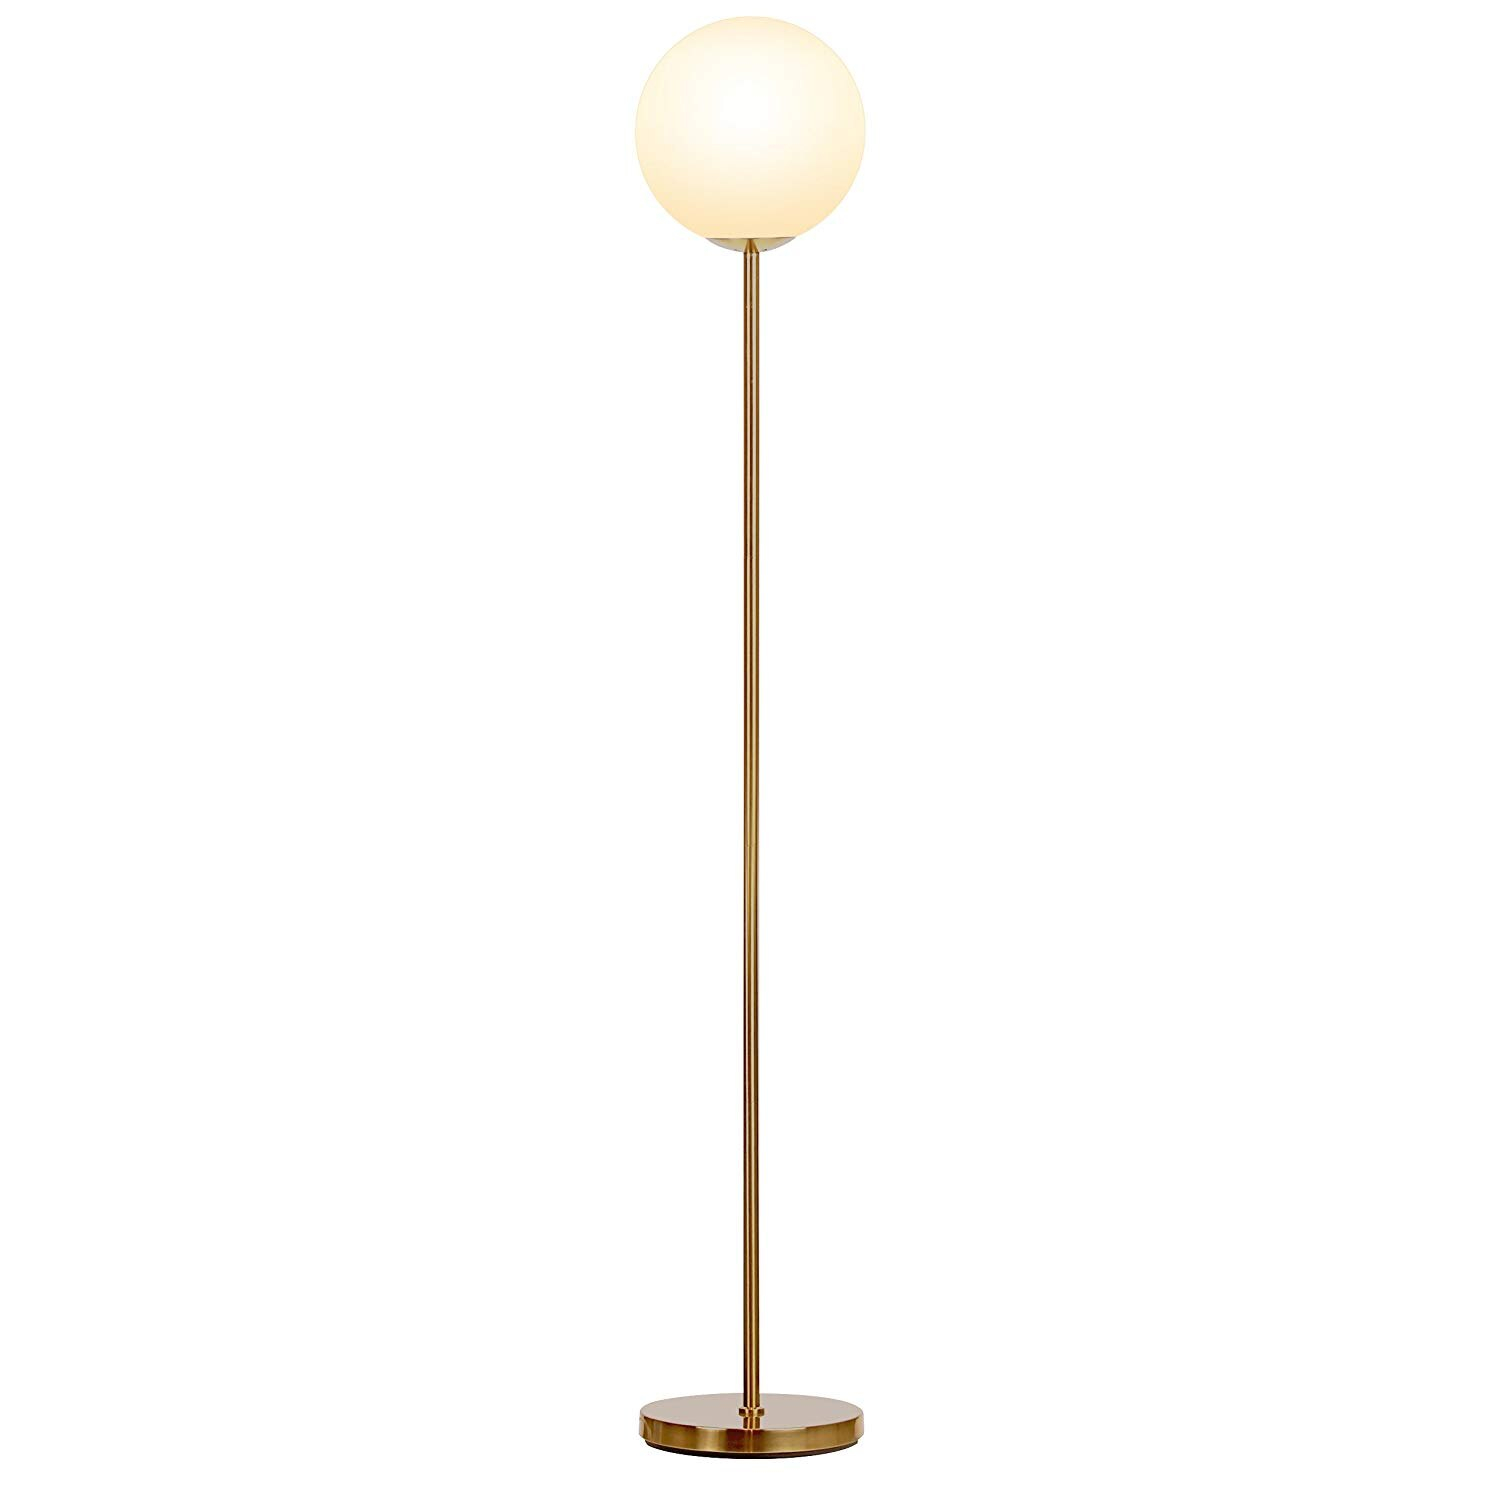 Us 1568 20 Offnordic Modern Frosted Glass Globe Led Floor Lamp Luxury Standing Lamp For Living Room Bedroom Office Bedside De Tall Pole Light In within dimensions 1500 X 1500